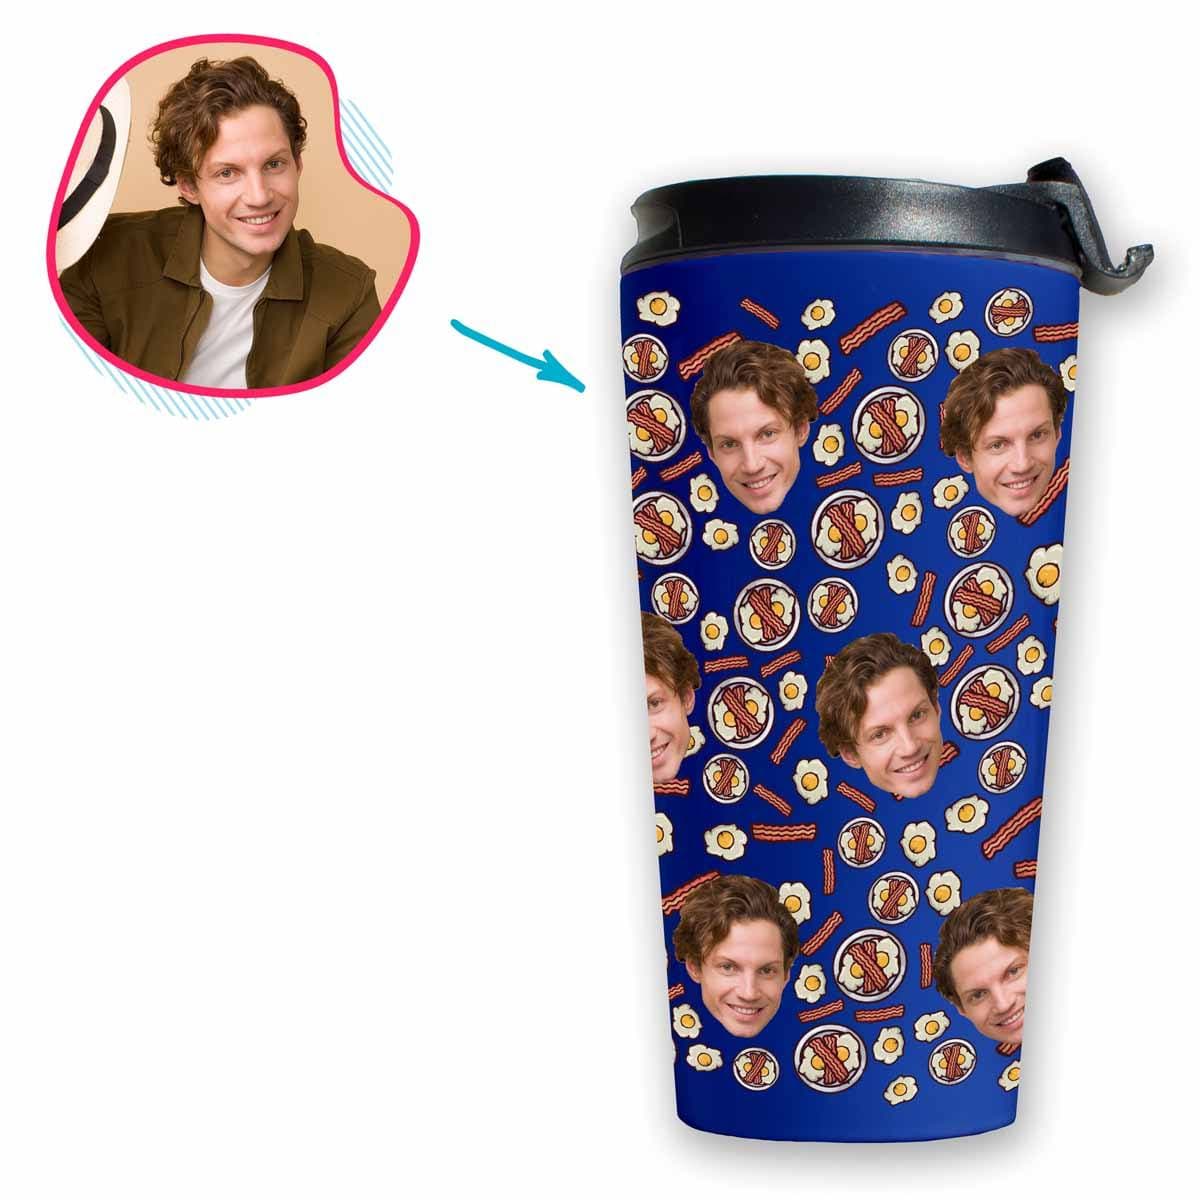 darkblue Bacon and Eggs travel mug personalized with photo of face printed on it